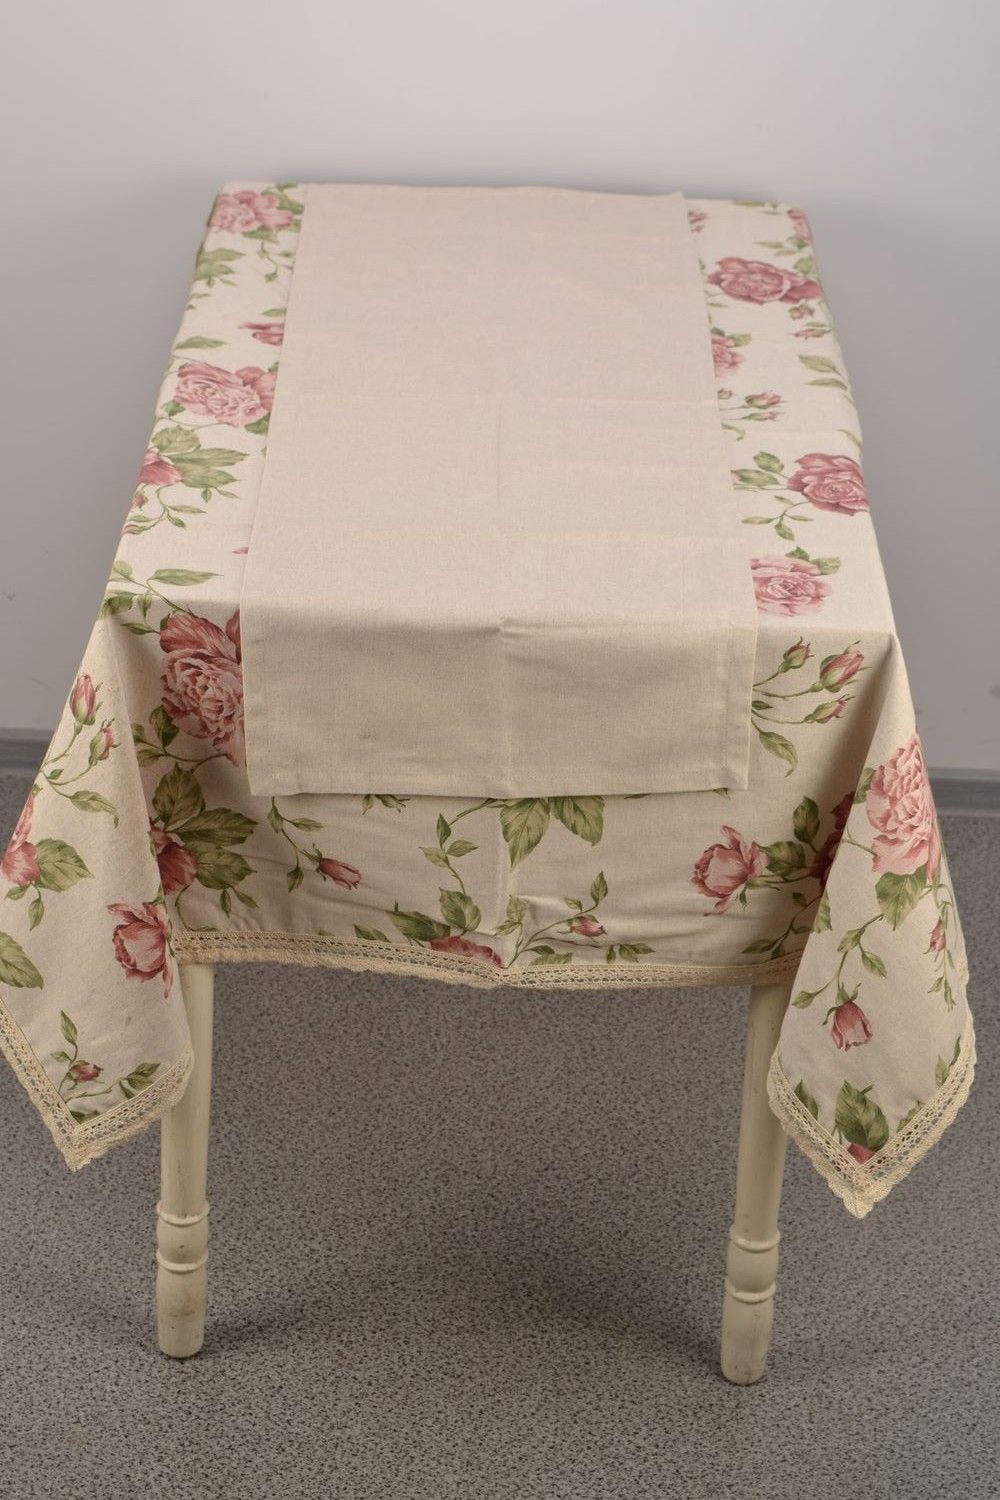 Handmade floral tablecloth sewn of cotton and polyamide photo 4